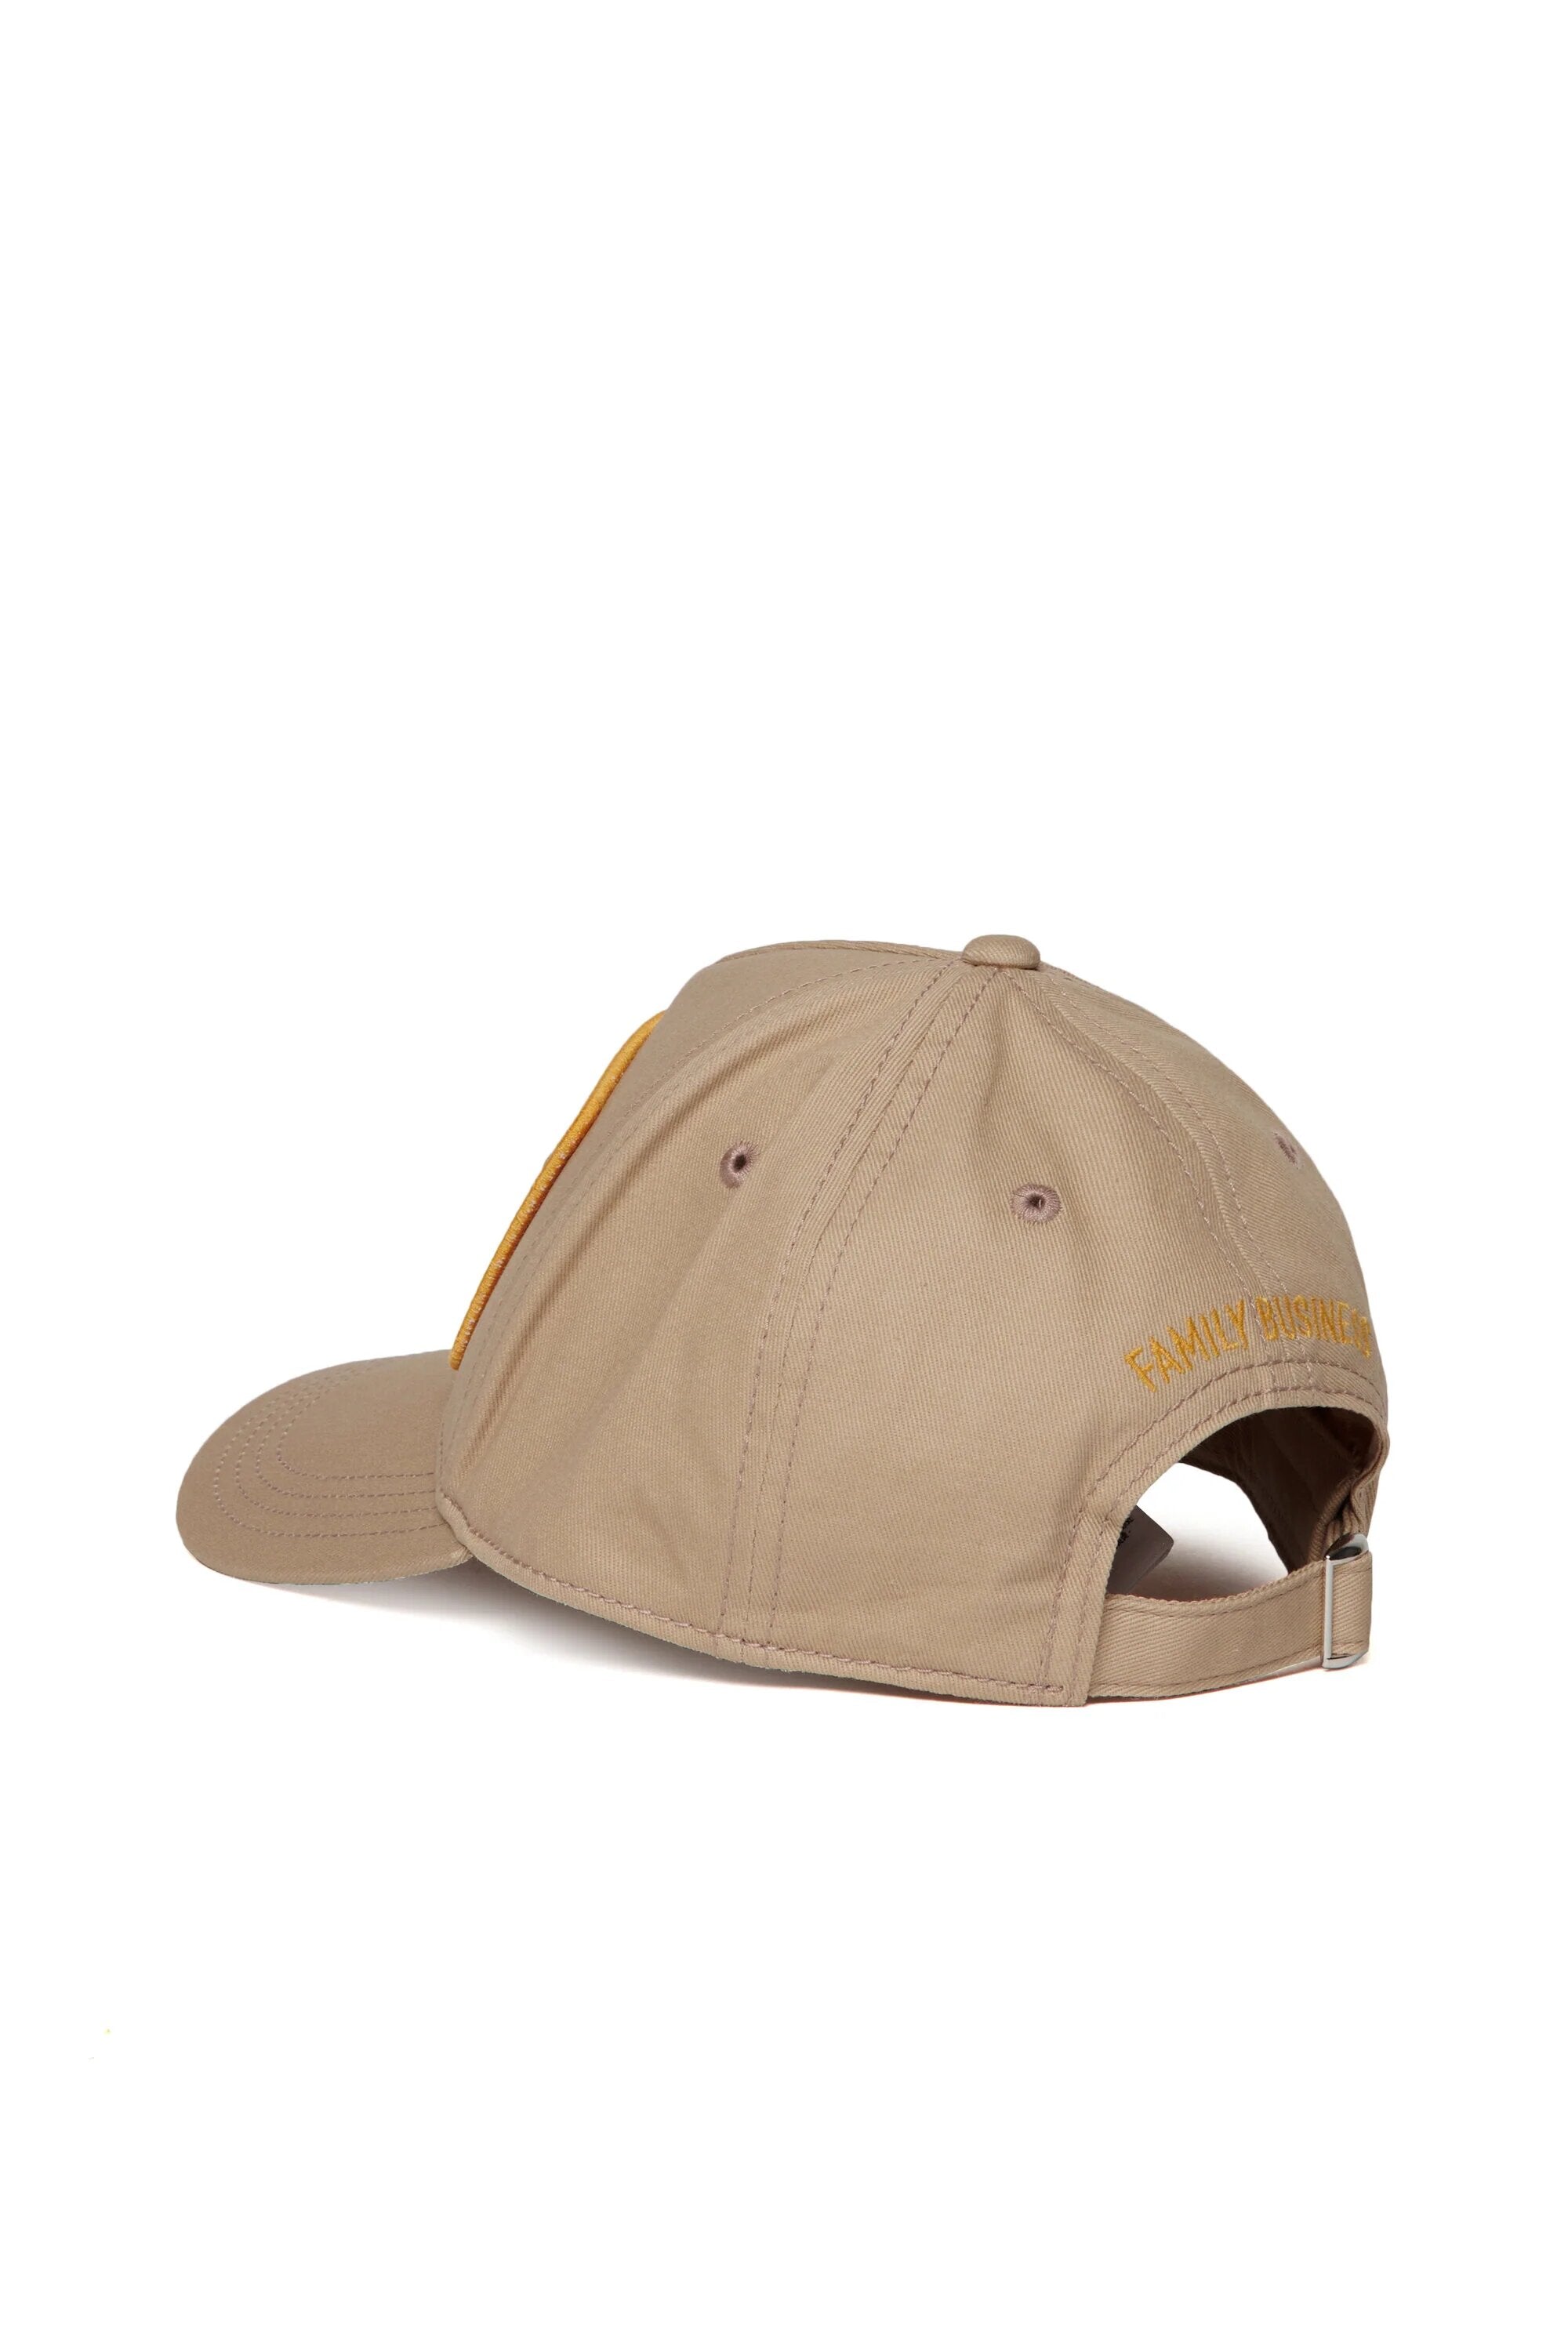 DSQUARED2-Cappello Bambino Patch Leaf-Beige